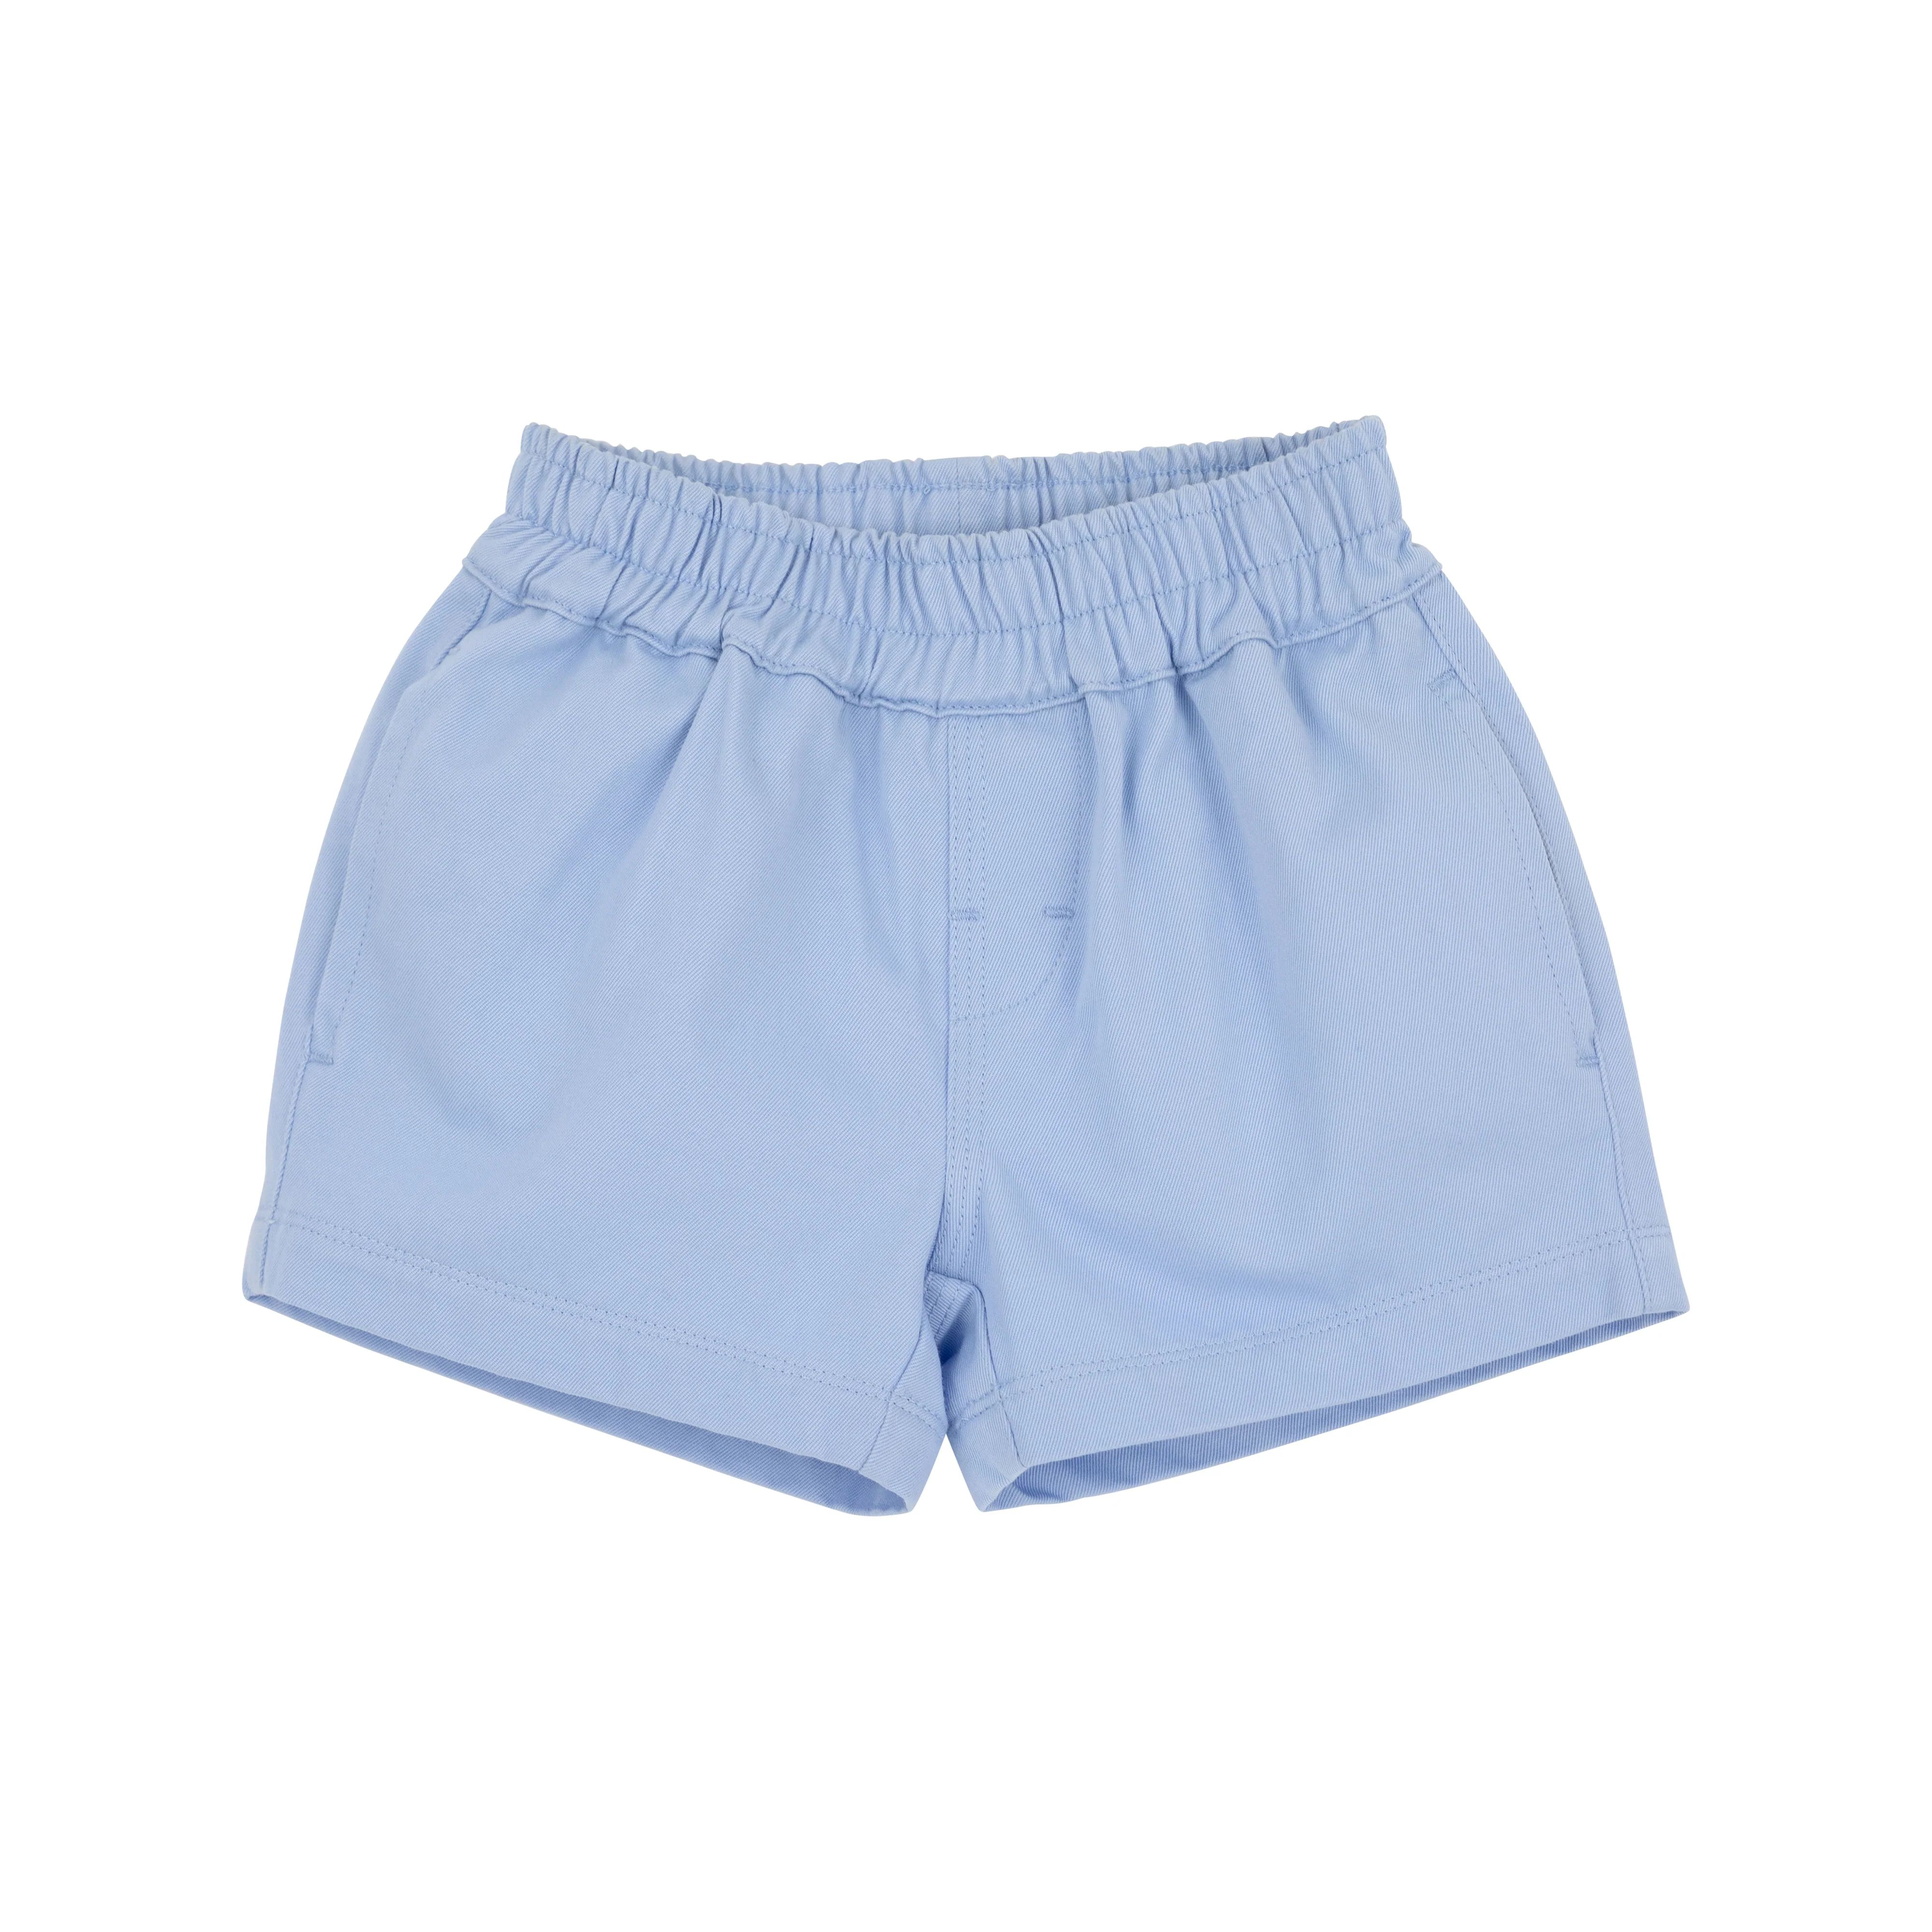 Sheffield Shorts - Beale Street Blue with Worth Avenue White Stork | The Beaufort Bonnet Company